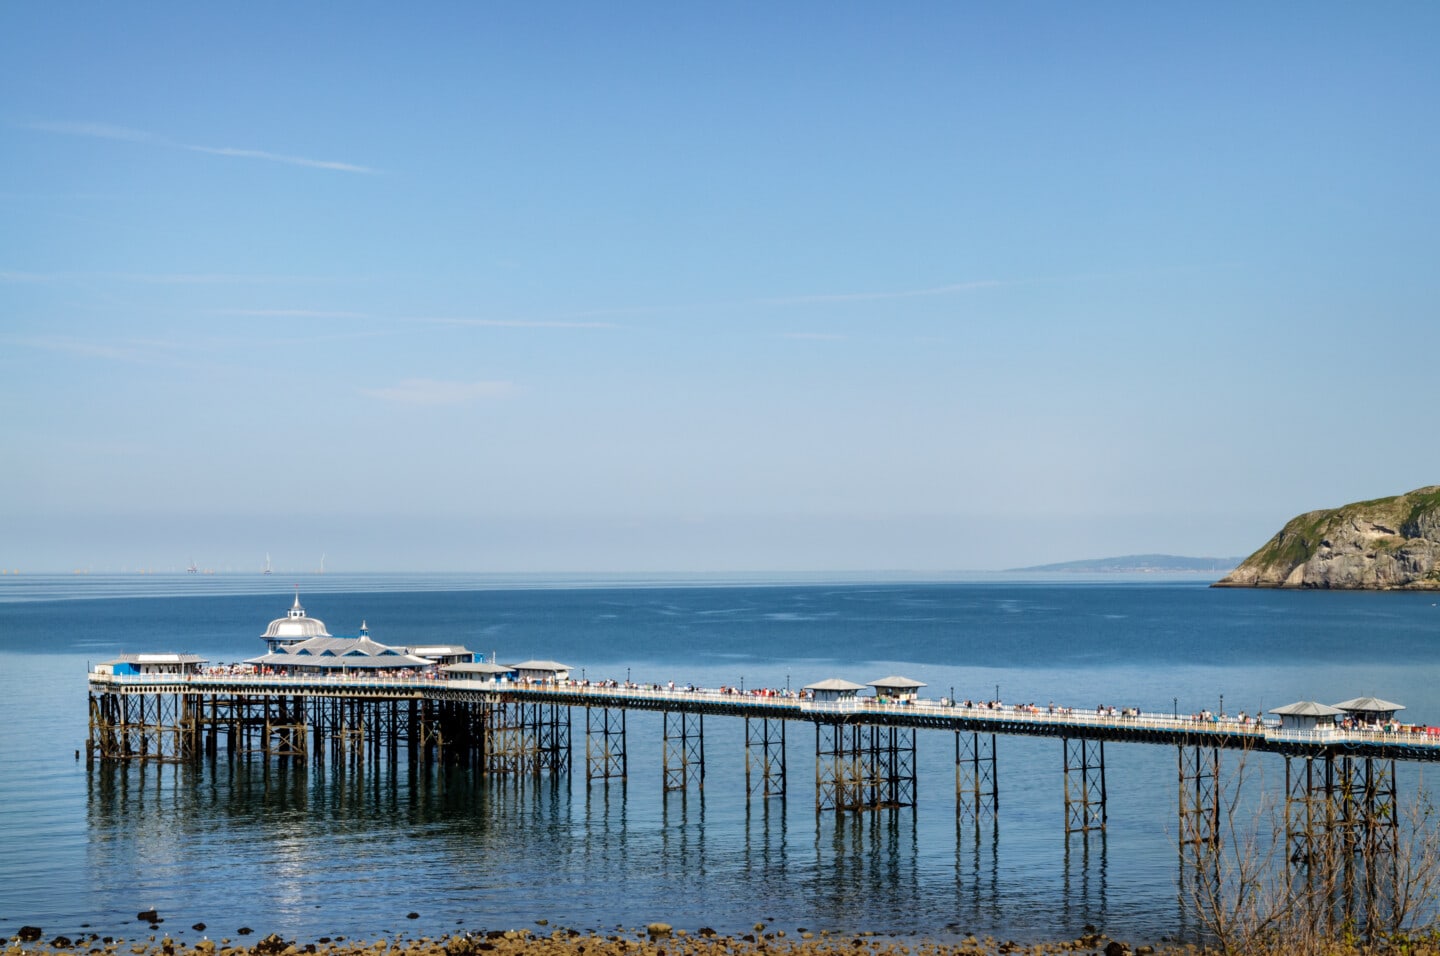 10 Things to do in Llandudno with Kids